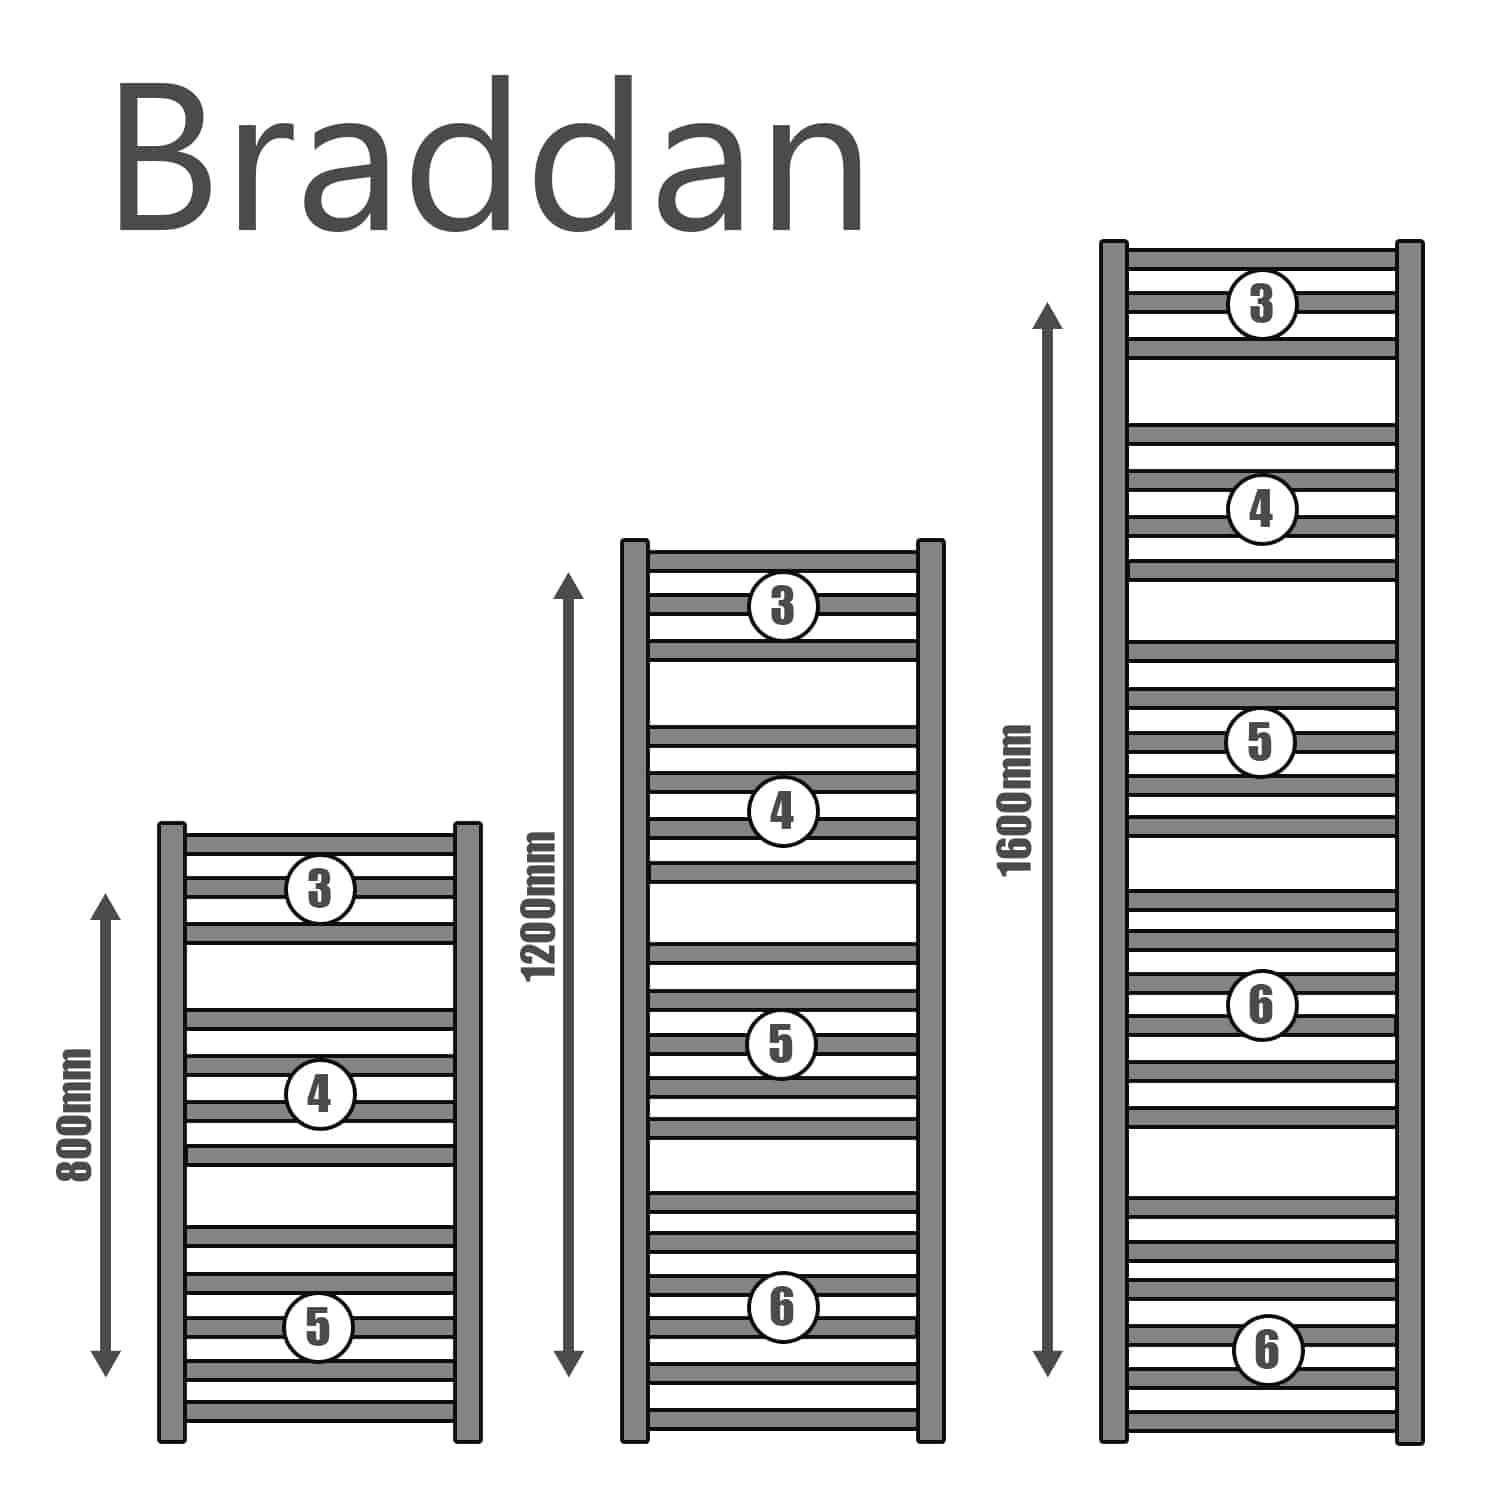 Braddan Stainless Steel | Dual Fuel Towel Rail with Thermostat, Timer + WiFi Control Best Quality & Price, Energy Saving / Economic To Run Buy Online From Adax SolAire UK Shop 16